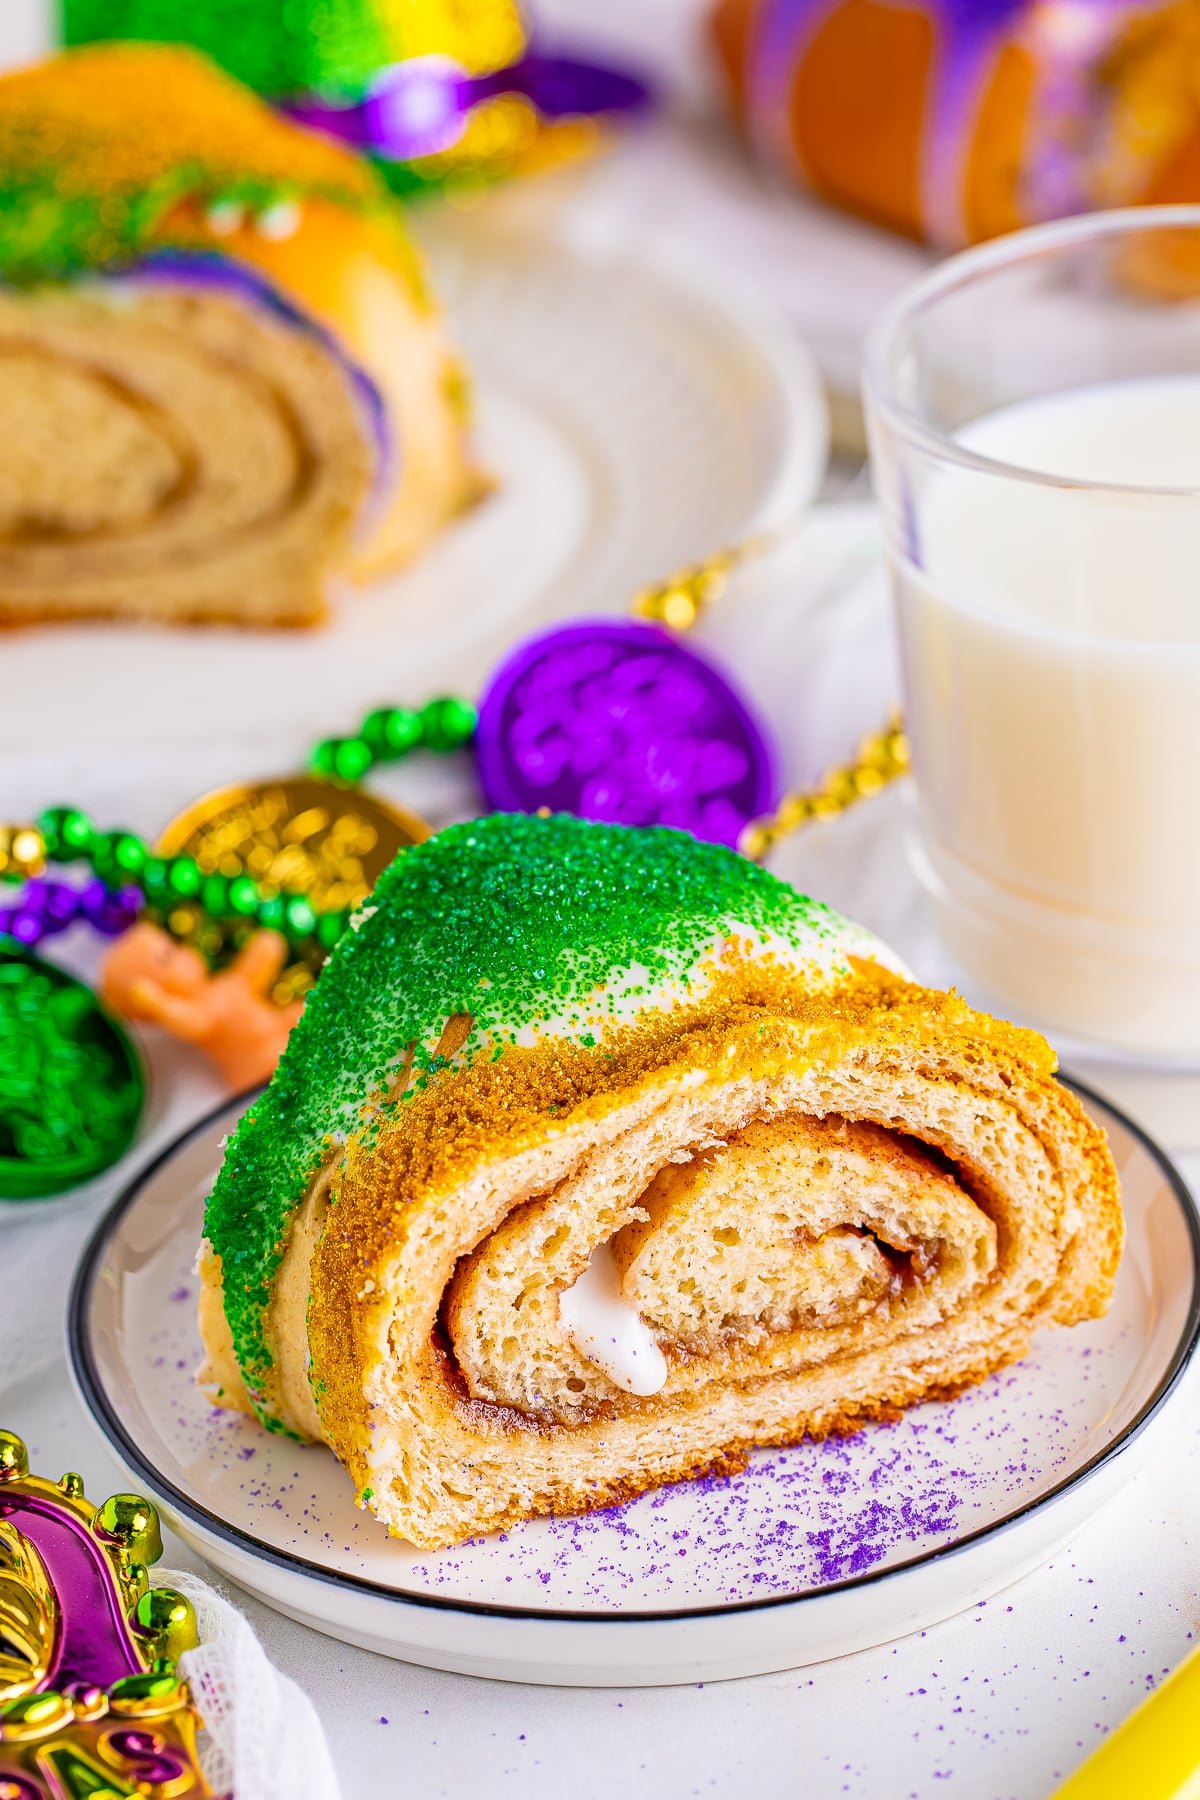 A slice of this King Cake Recipe on a white plate with black rim, mardi gras decorations in the background with a glass of milk.